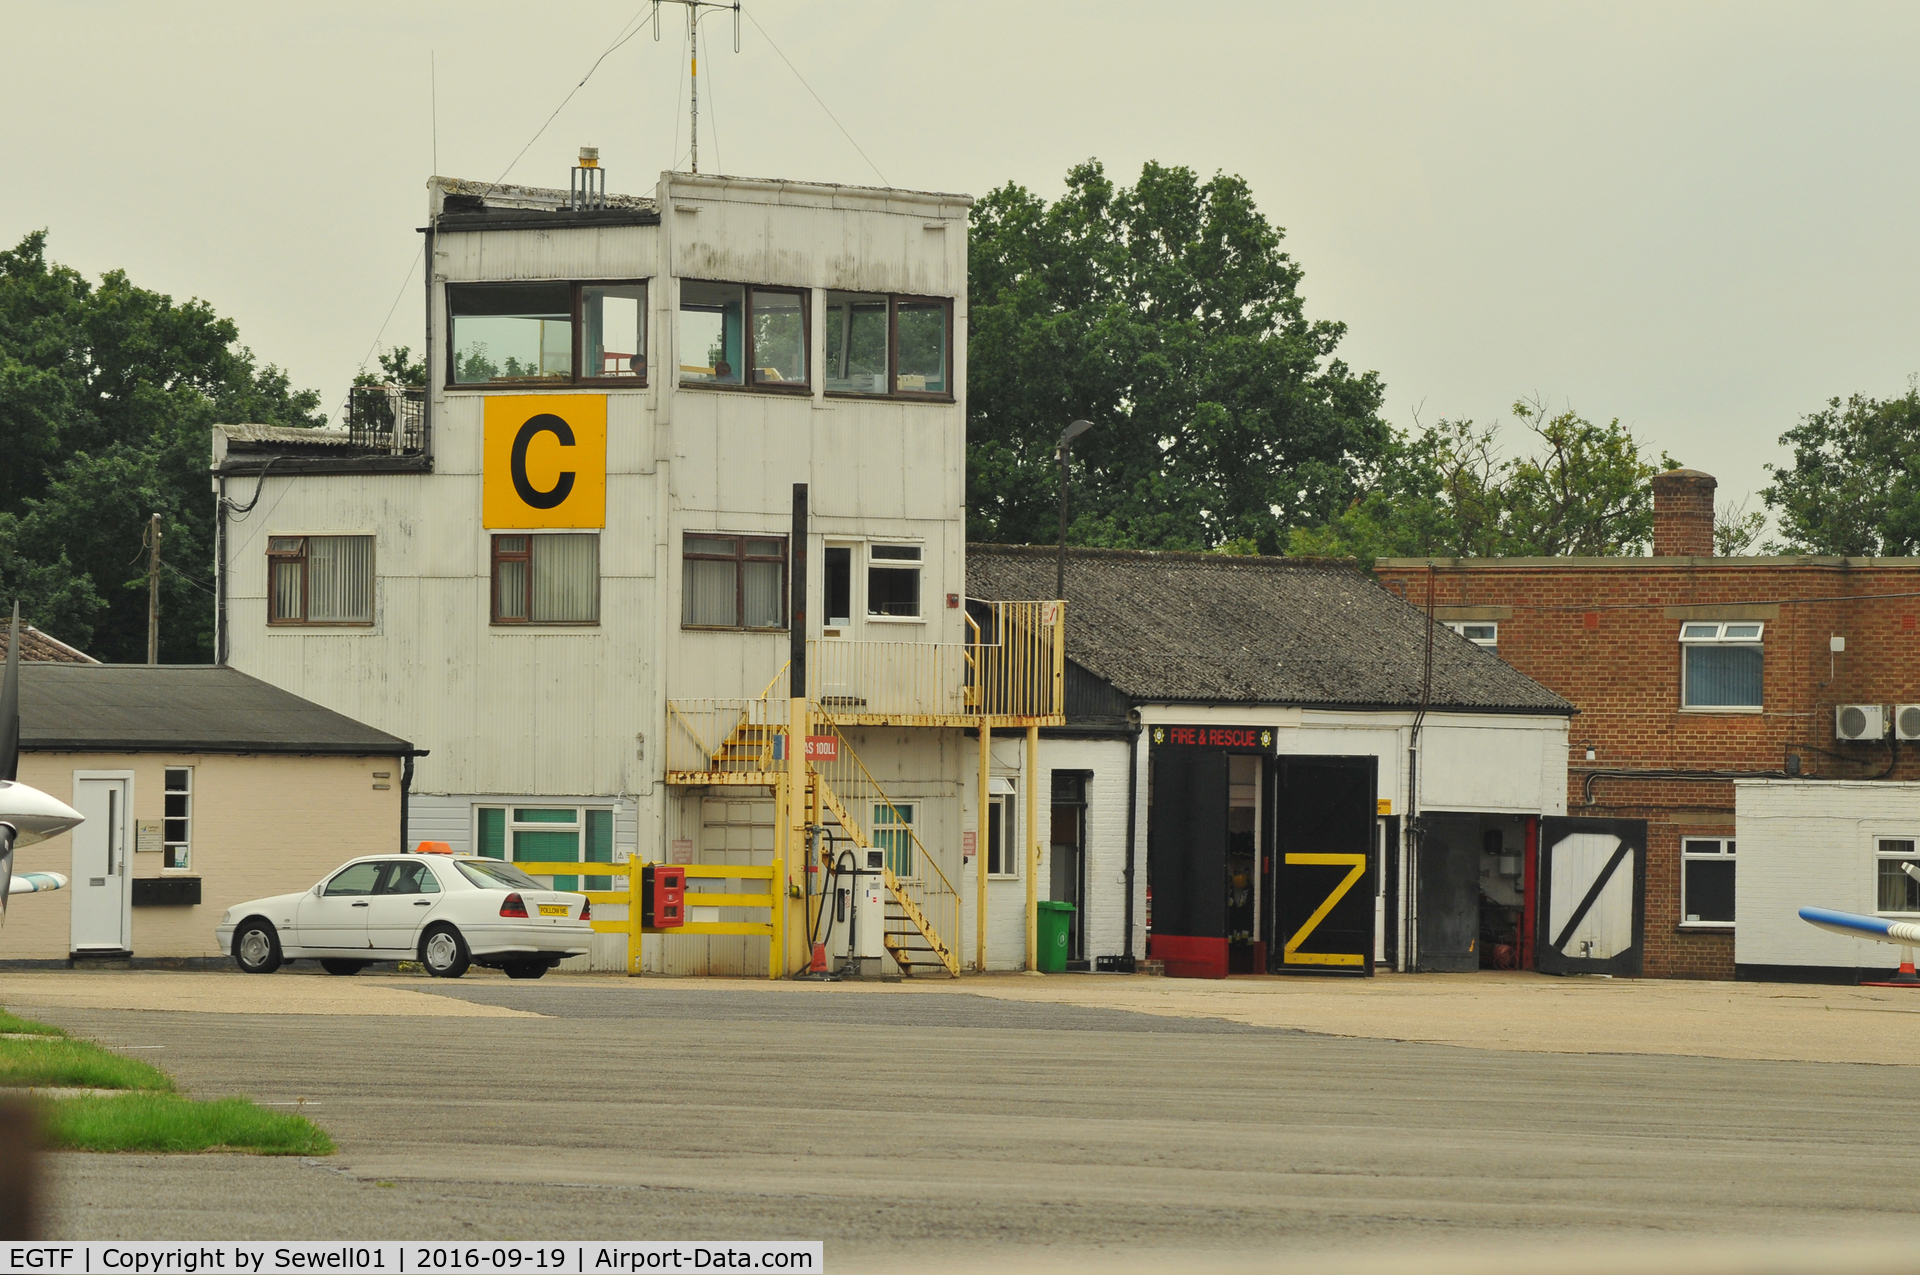 Fairoaks Airport, Chobham, England United Kingdom (EGTF) - CONTROL TOWER
'Follow me' Mercedes in front of the building